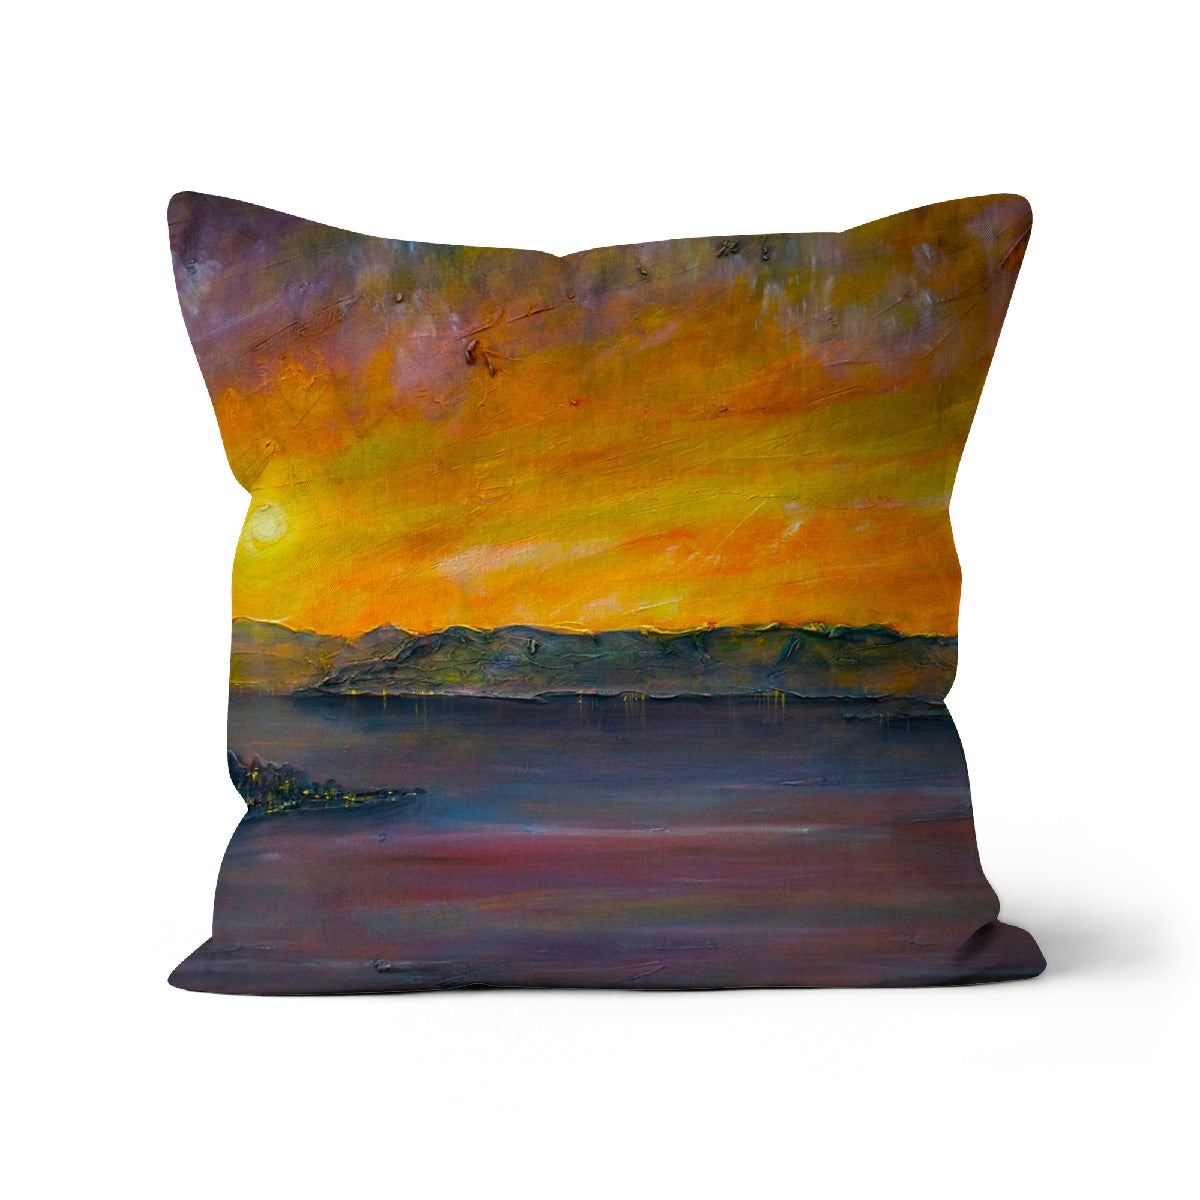 Sunset Over Gourock Art Gifts Cushion-Cushions-River Clyde Art Gallery-Faux Suede-24"x24"-Paintings, Prints, Homeware, Art Gifts From Scotland By Scottish Artist Kevin Hunter